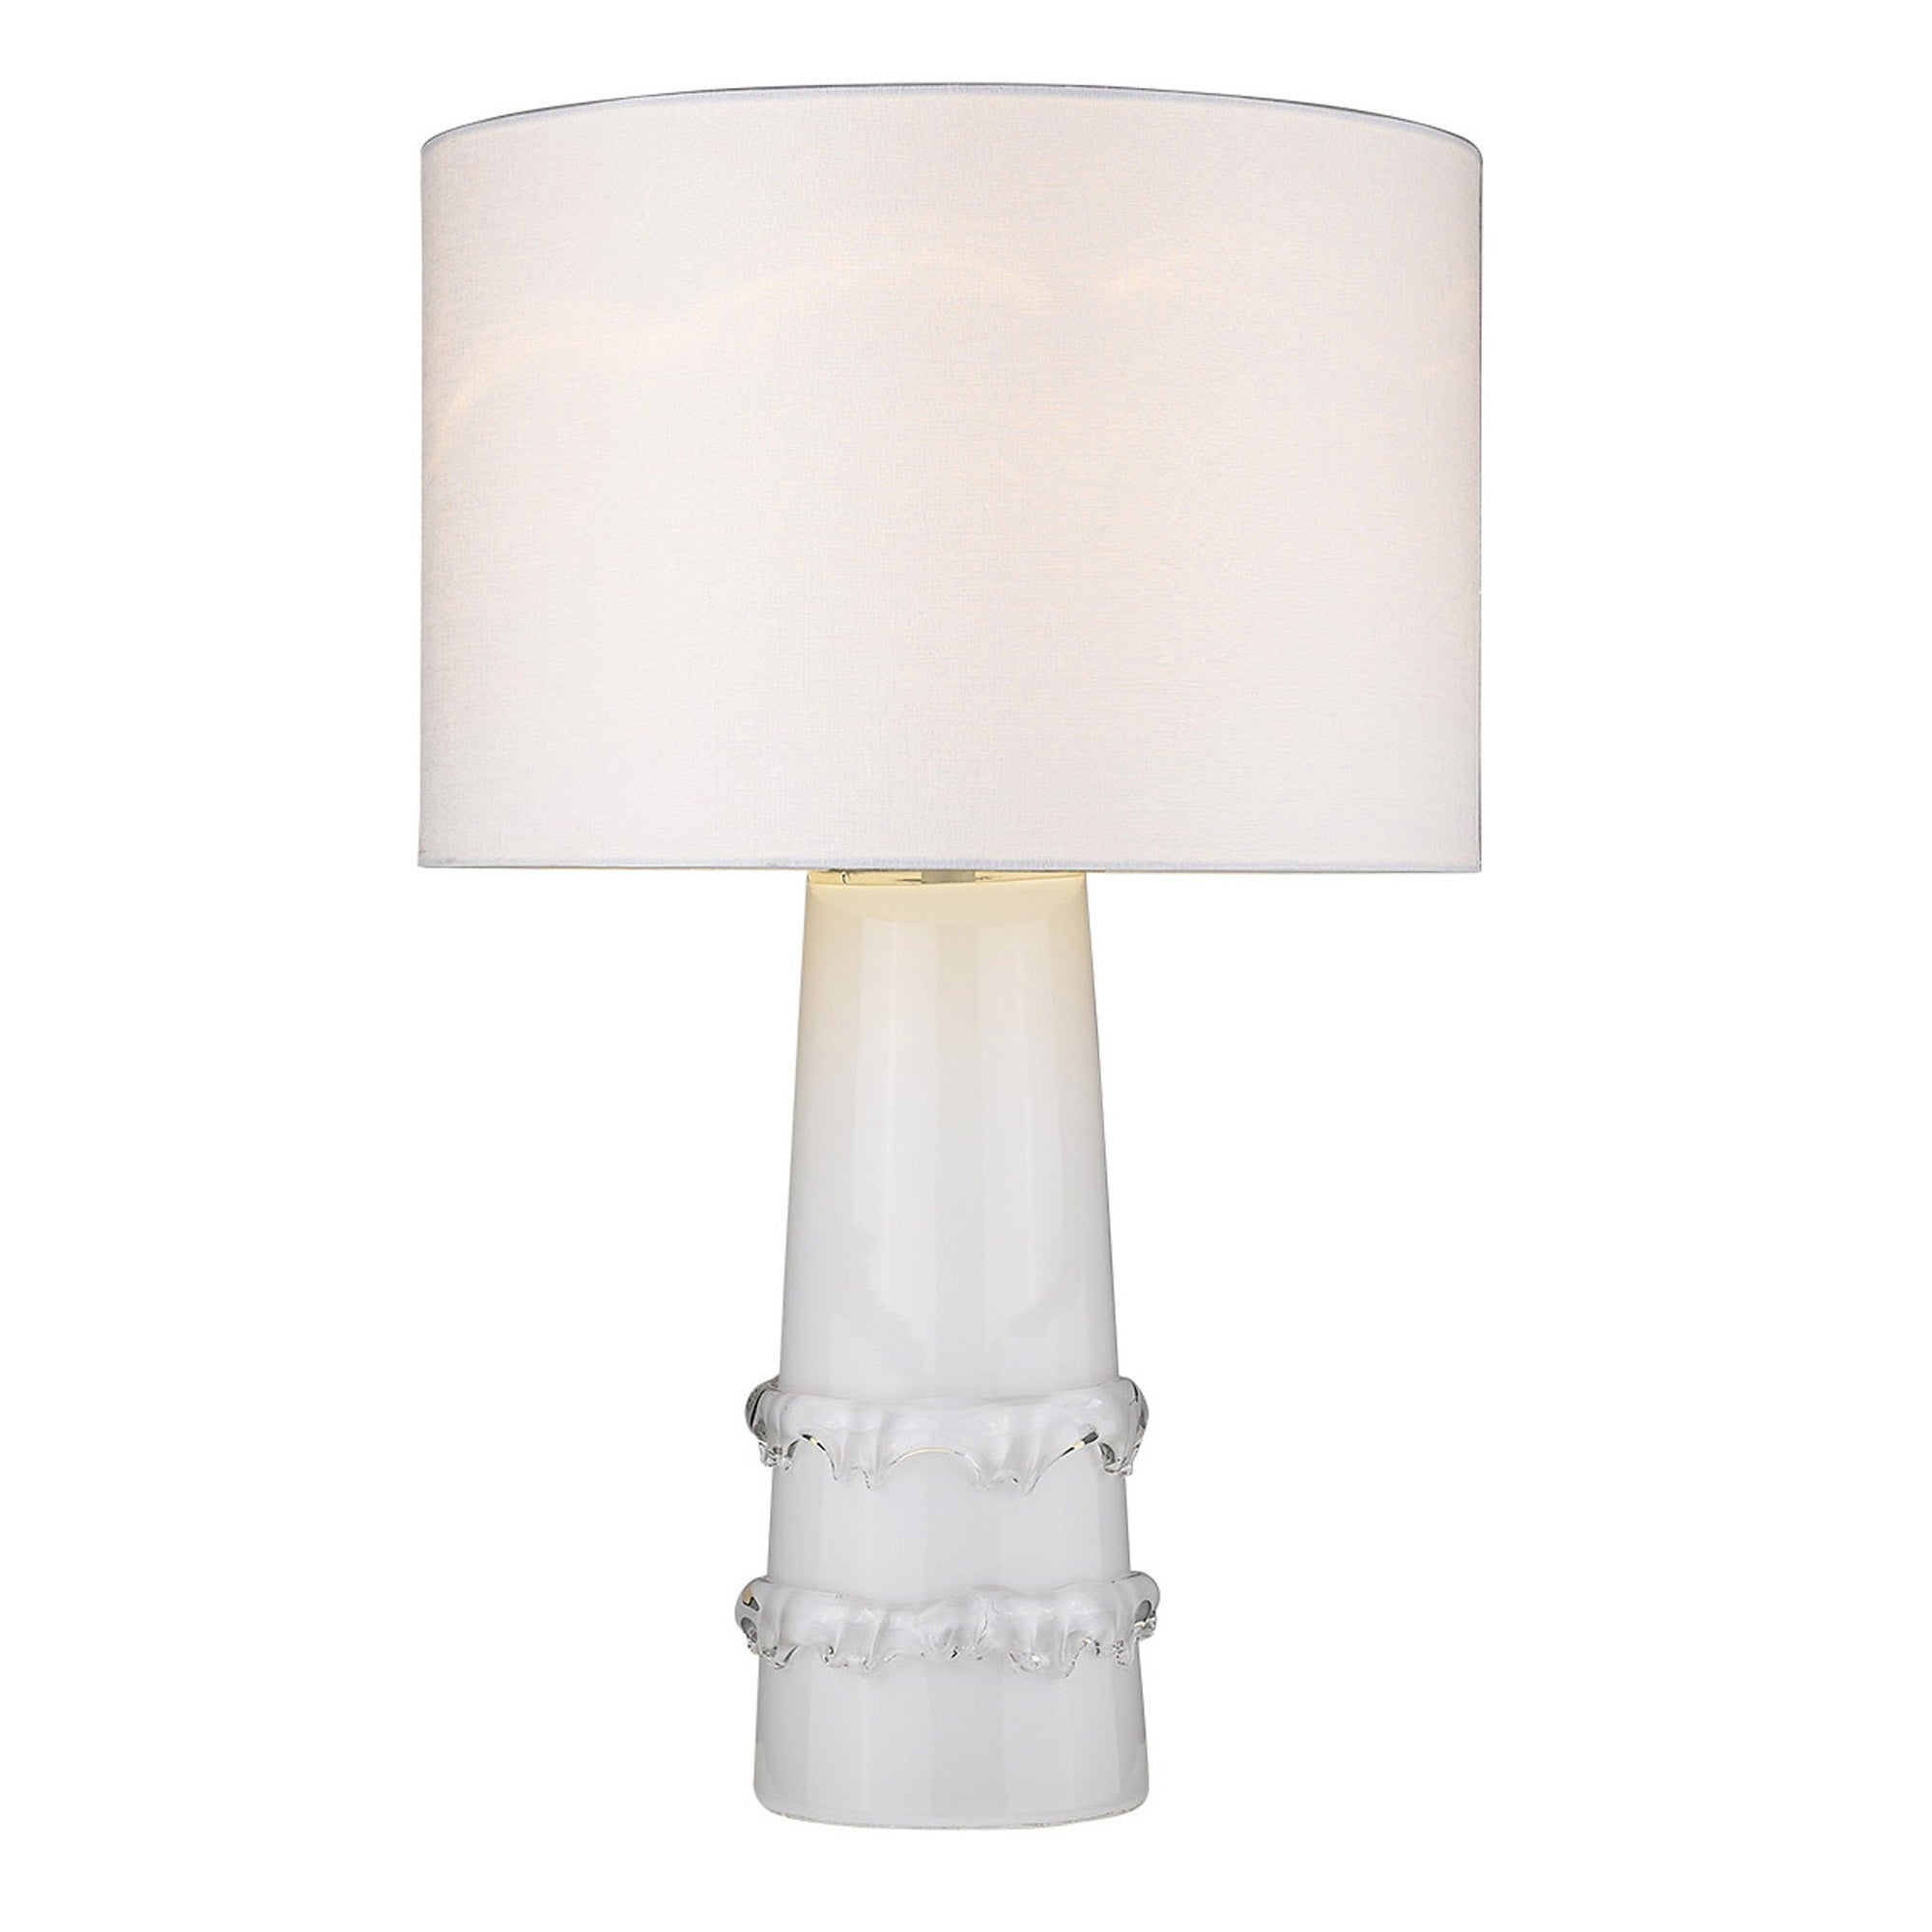 29" White Glass Column Table Lamp With White Drum Shade